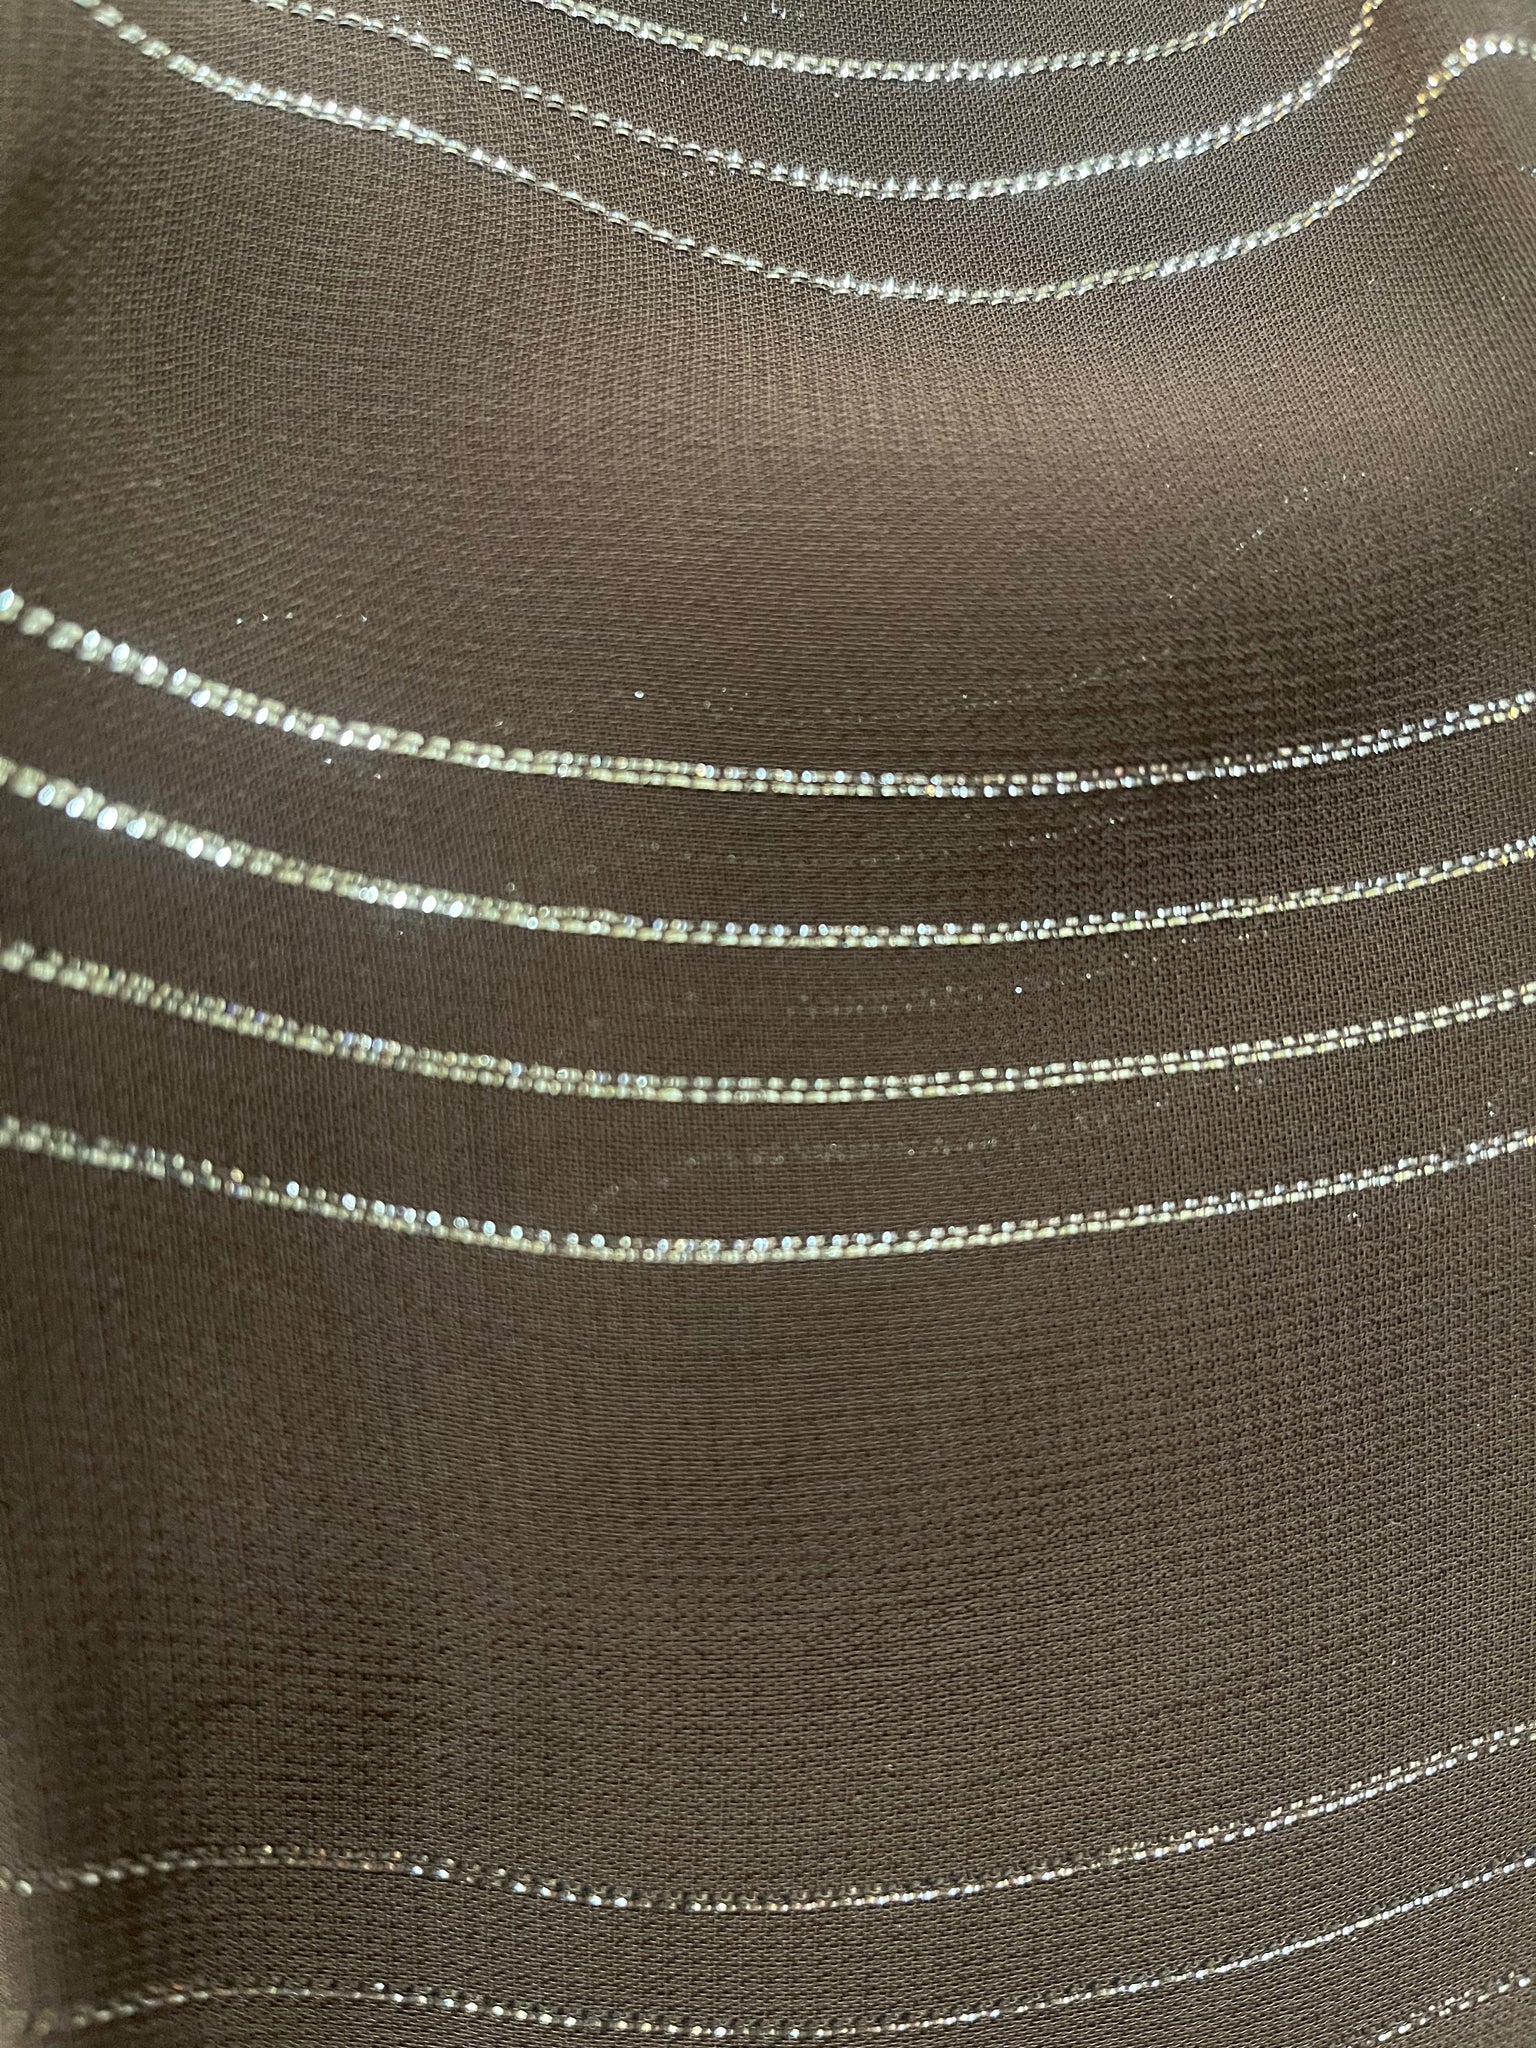 Norell Tassell 70 Chocolate Brown Silk Striped Dress DETAIL 4 of 5